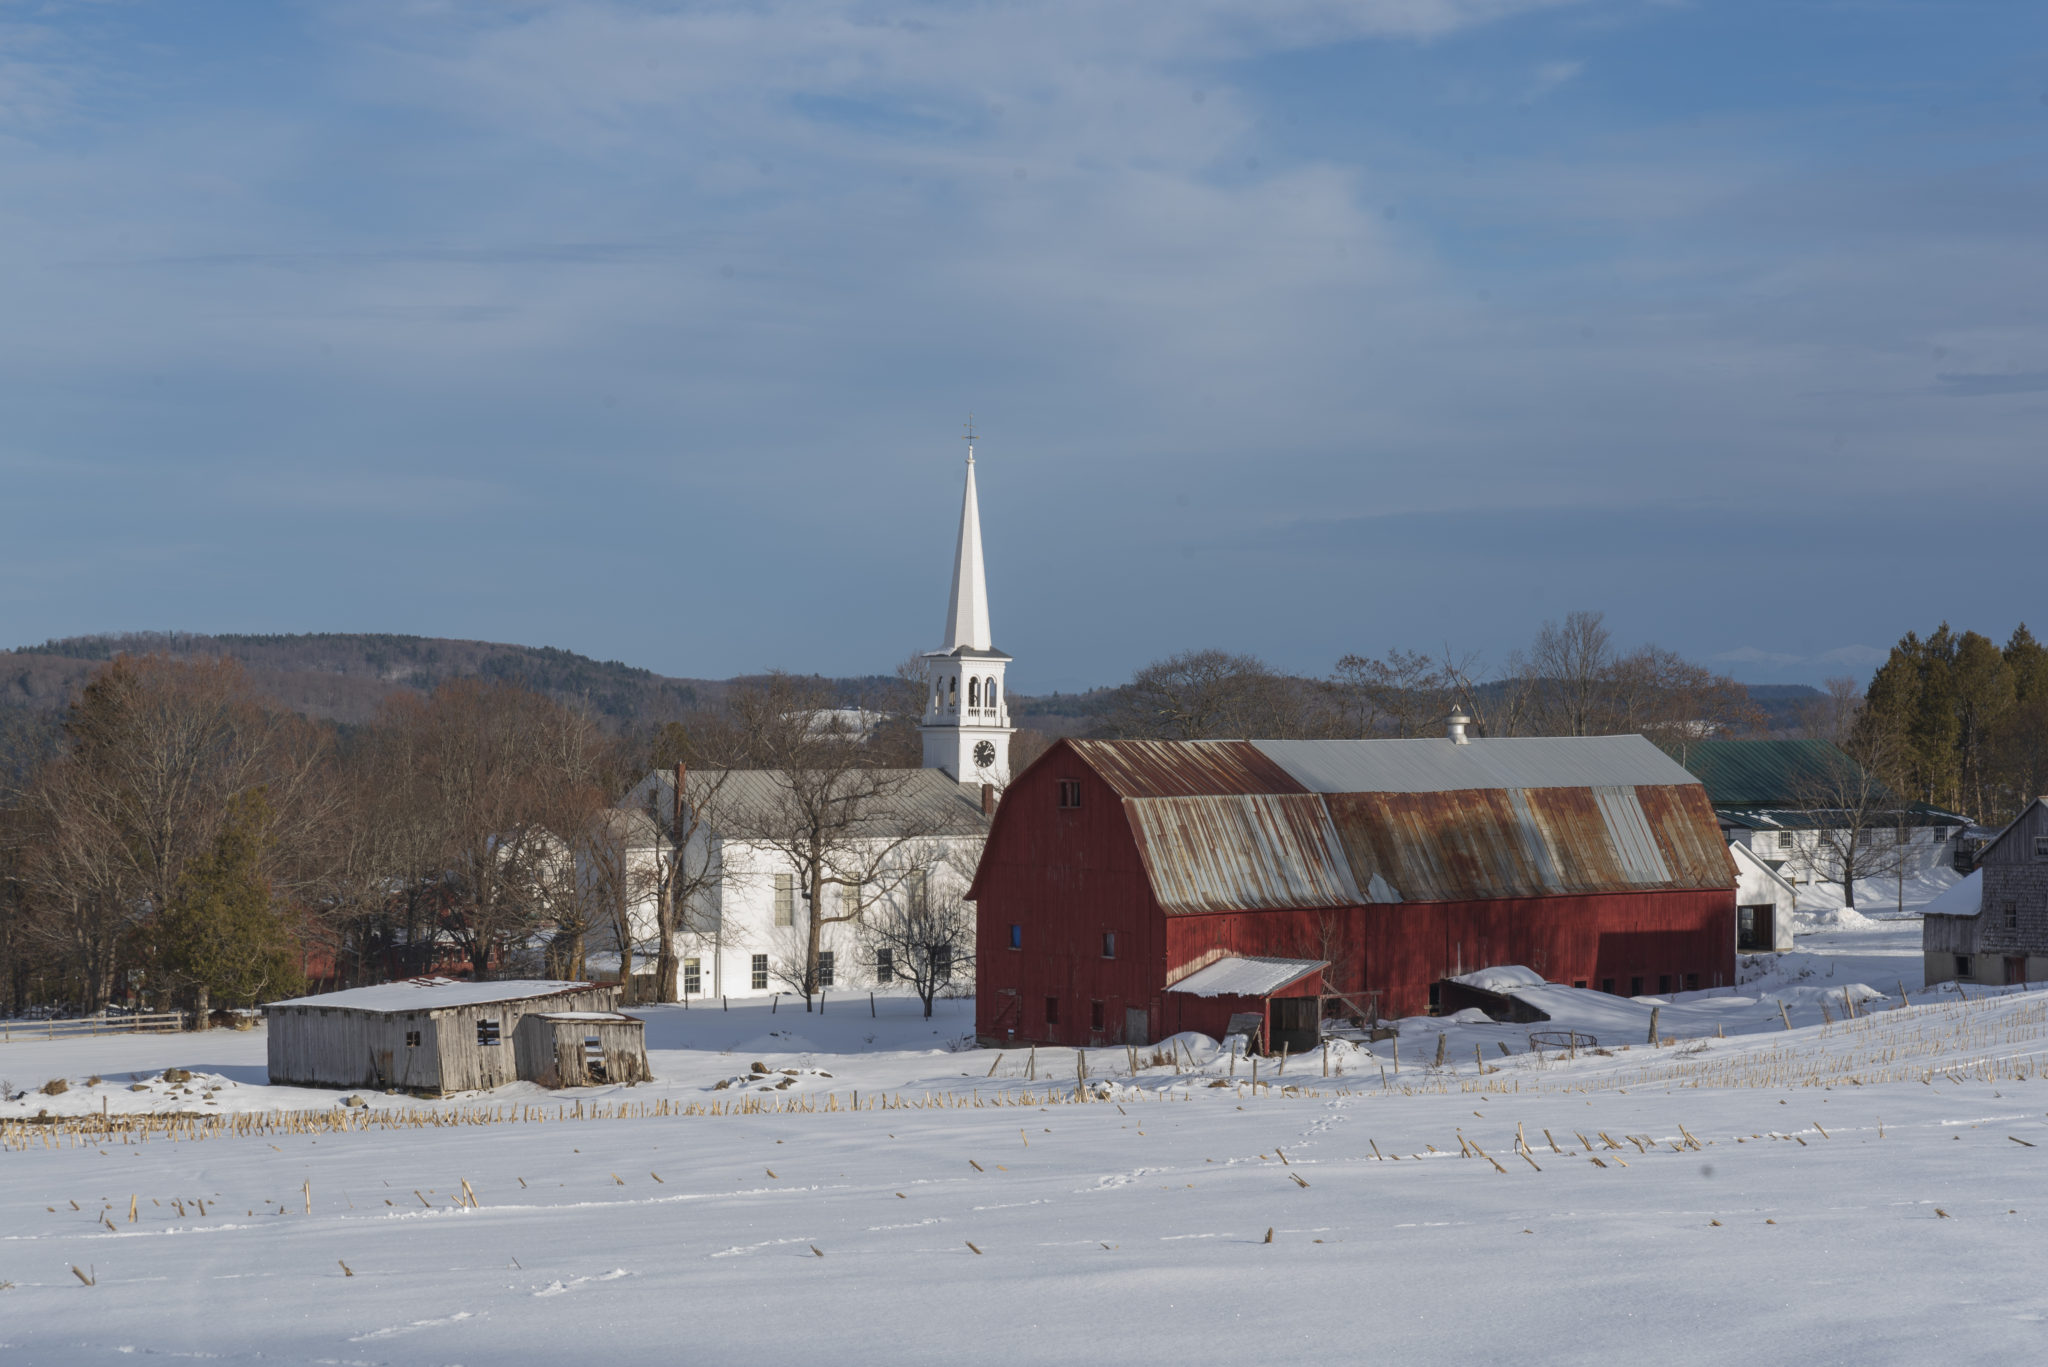 Vermont Landscape photography tips featured on top New England travel photography blogger, Shannon Shipman.